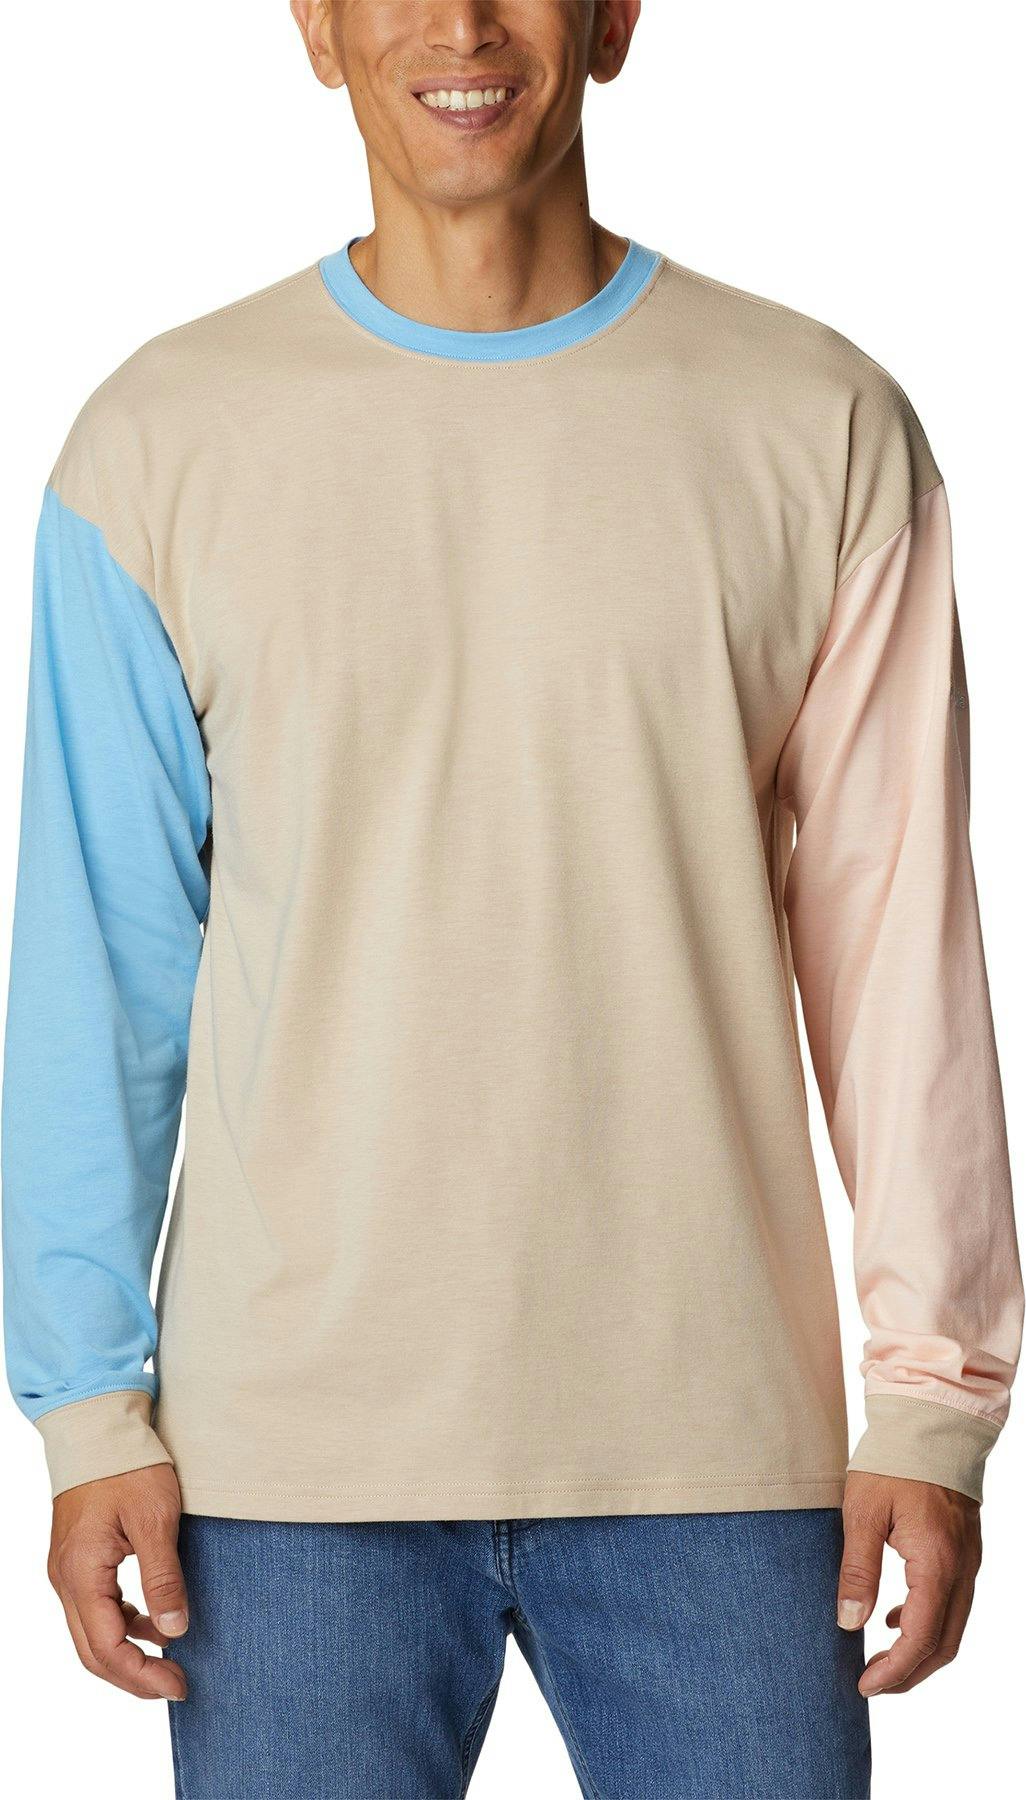 Product image for Deschutes Valley Long Sleeve T-Shirt - Men's